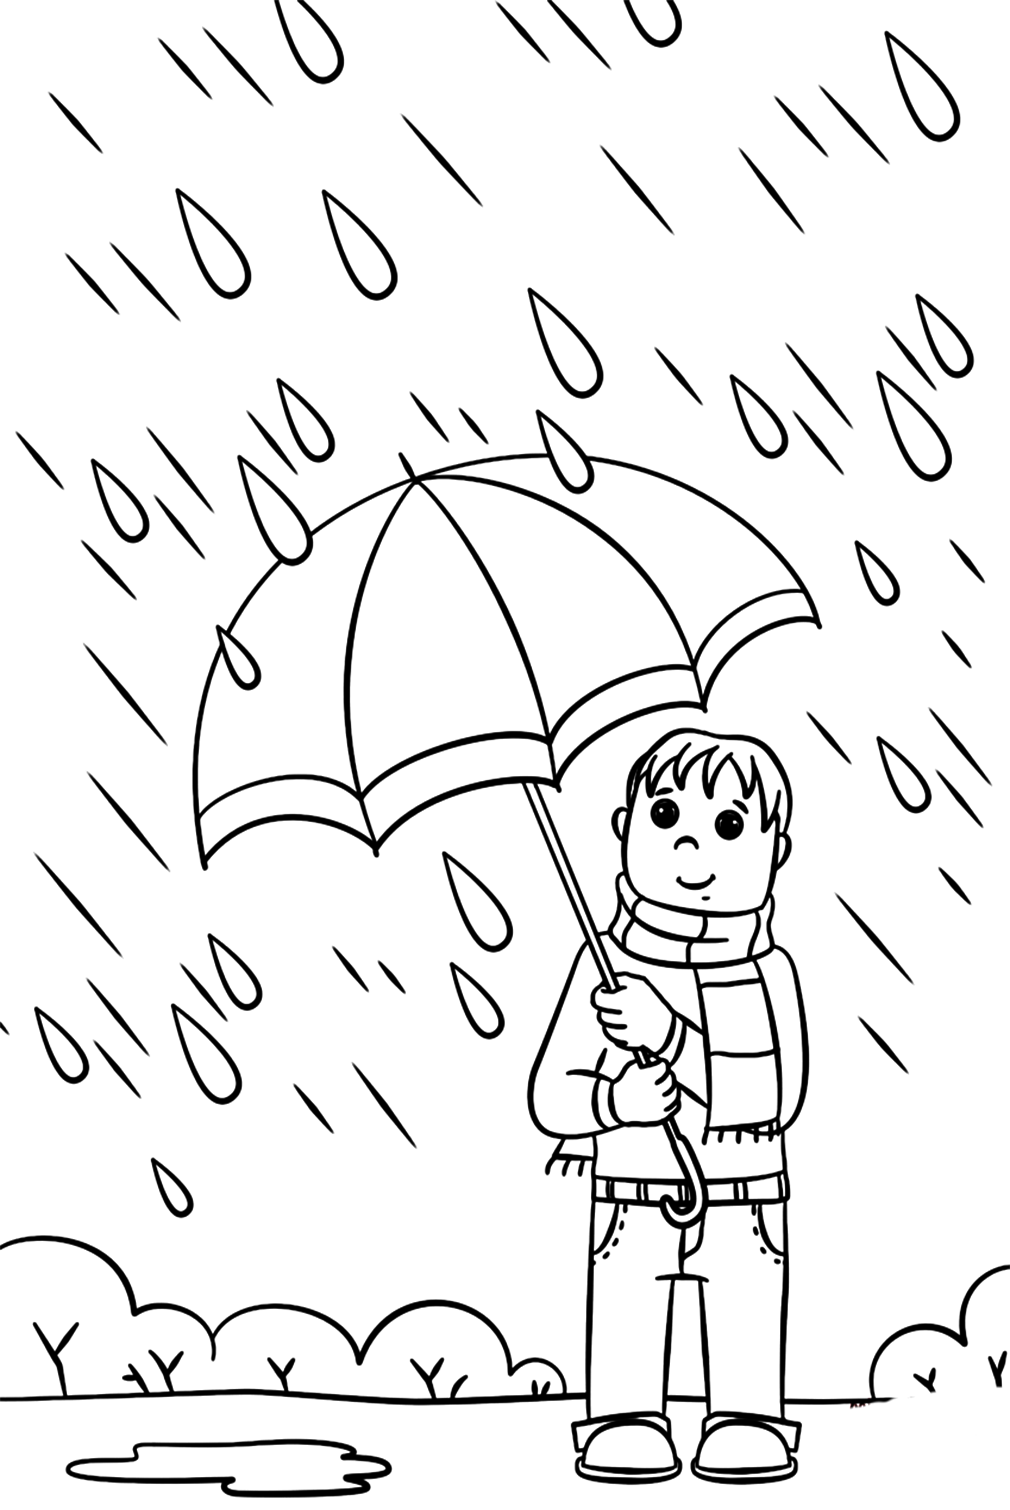 Rainy Day In Fall Season Coloring Page